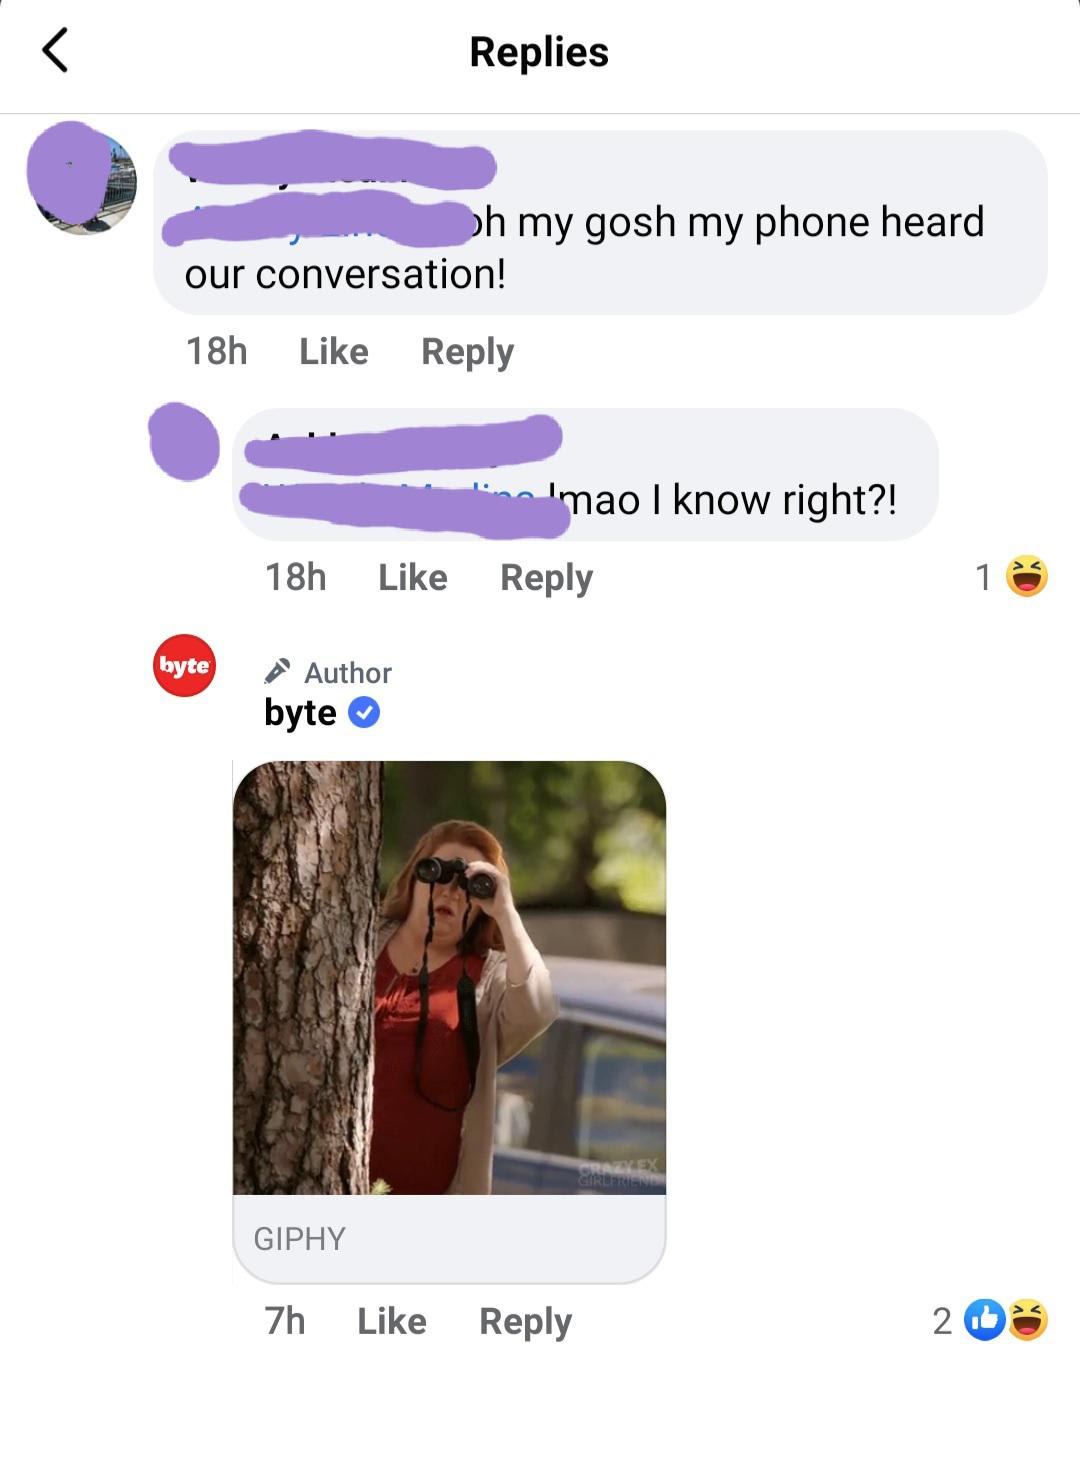 Person makes comment about our phones listening to us for targeted marketing, brand thinks it's funny to reply with a witty gif.